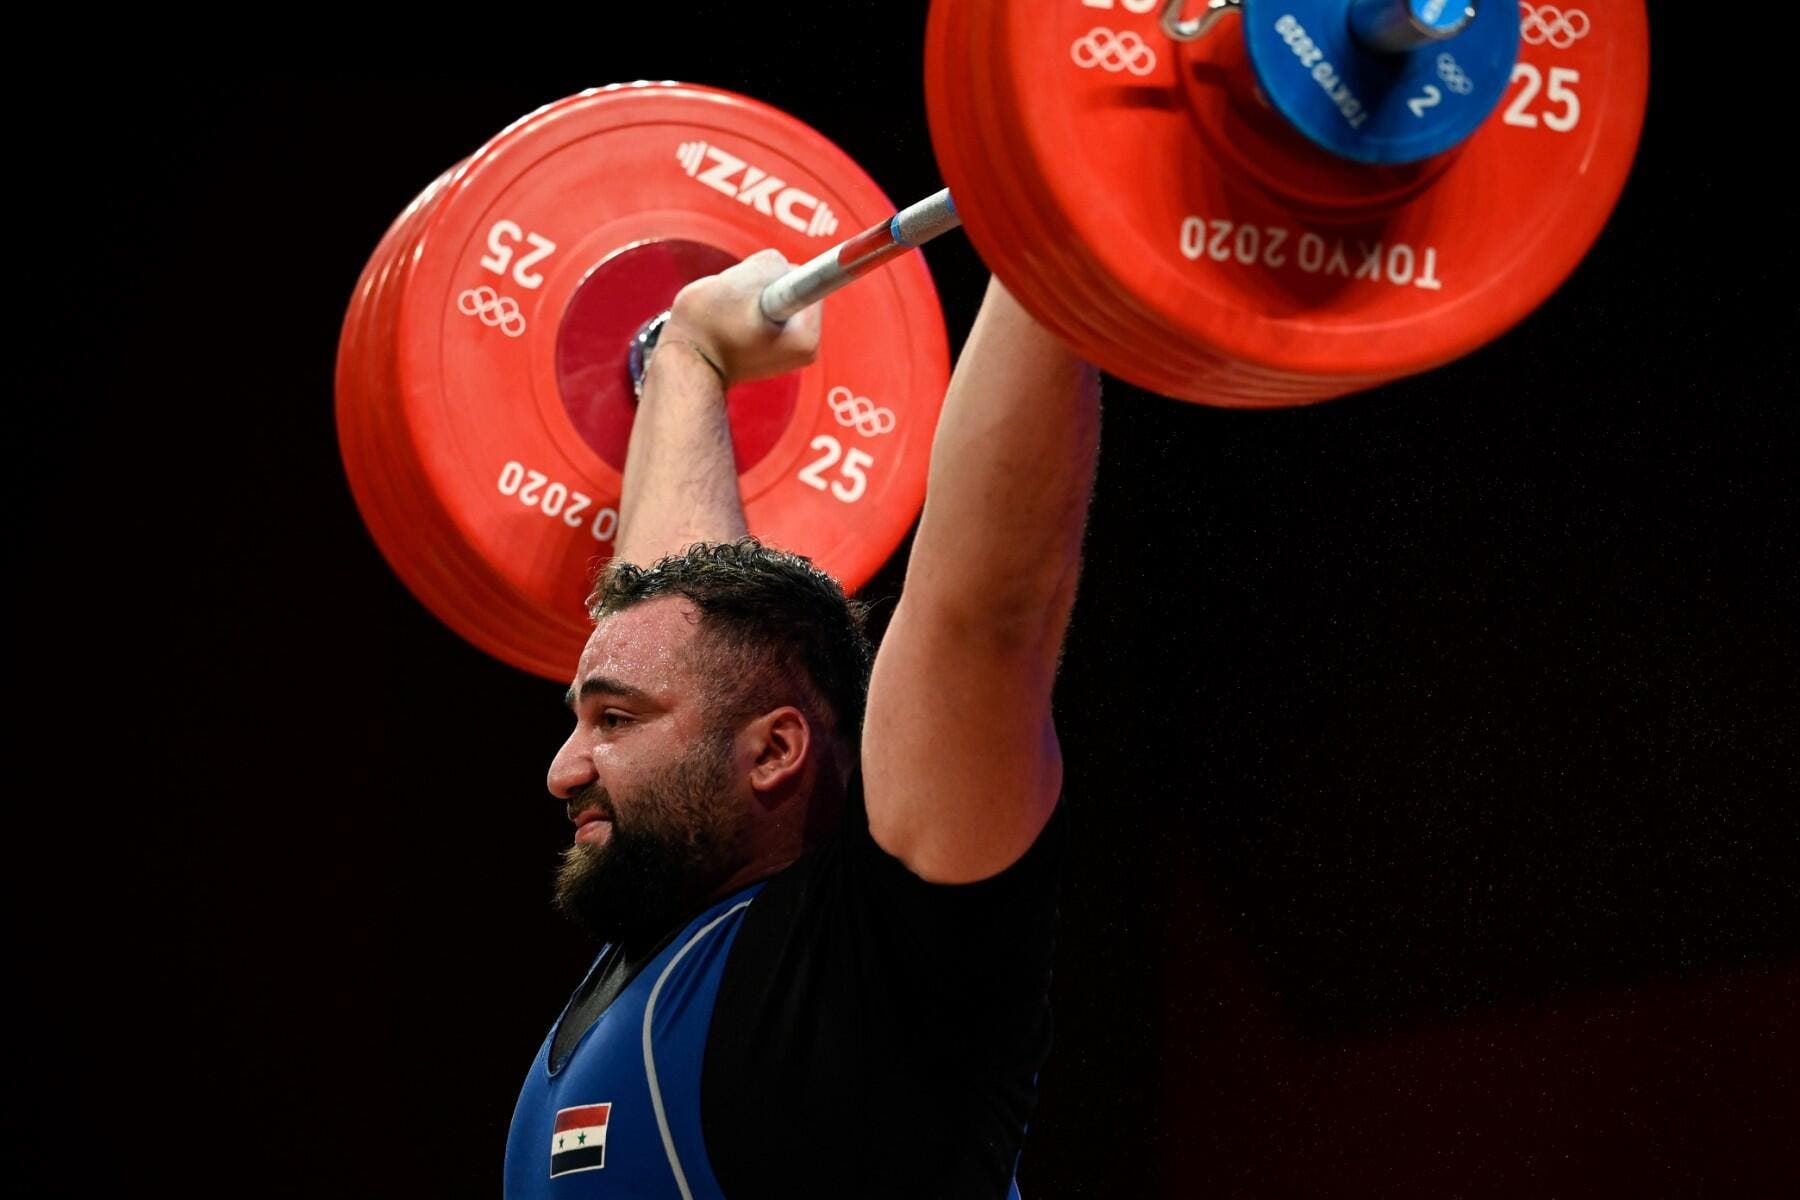 Tokyo 2020: Weightlifter Maan Asaad Takes First Medal for Syria